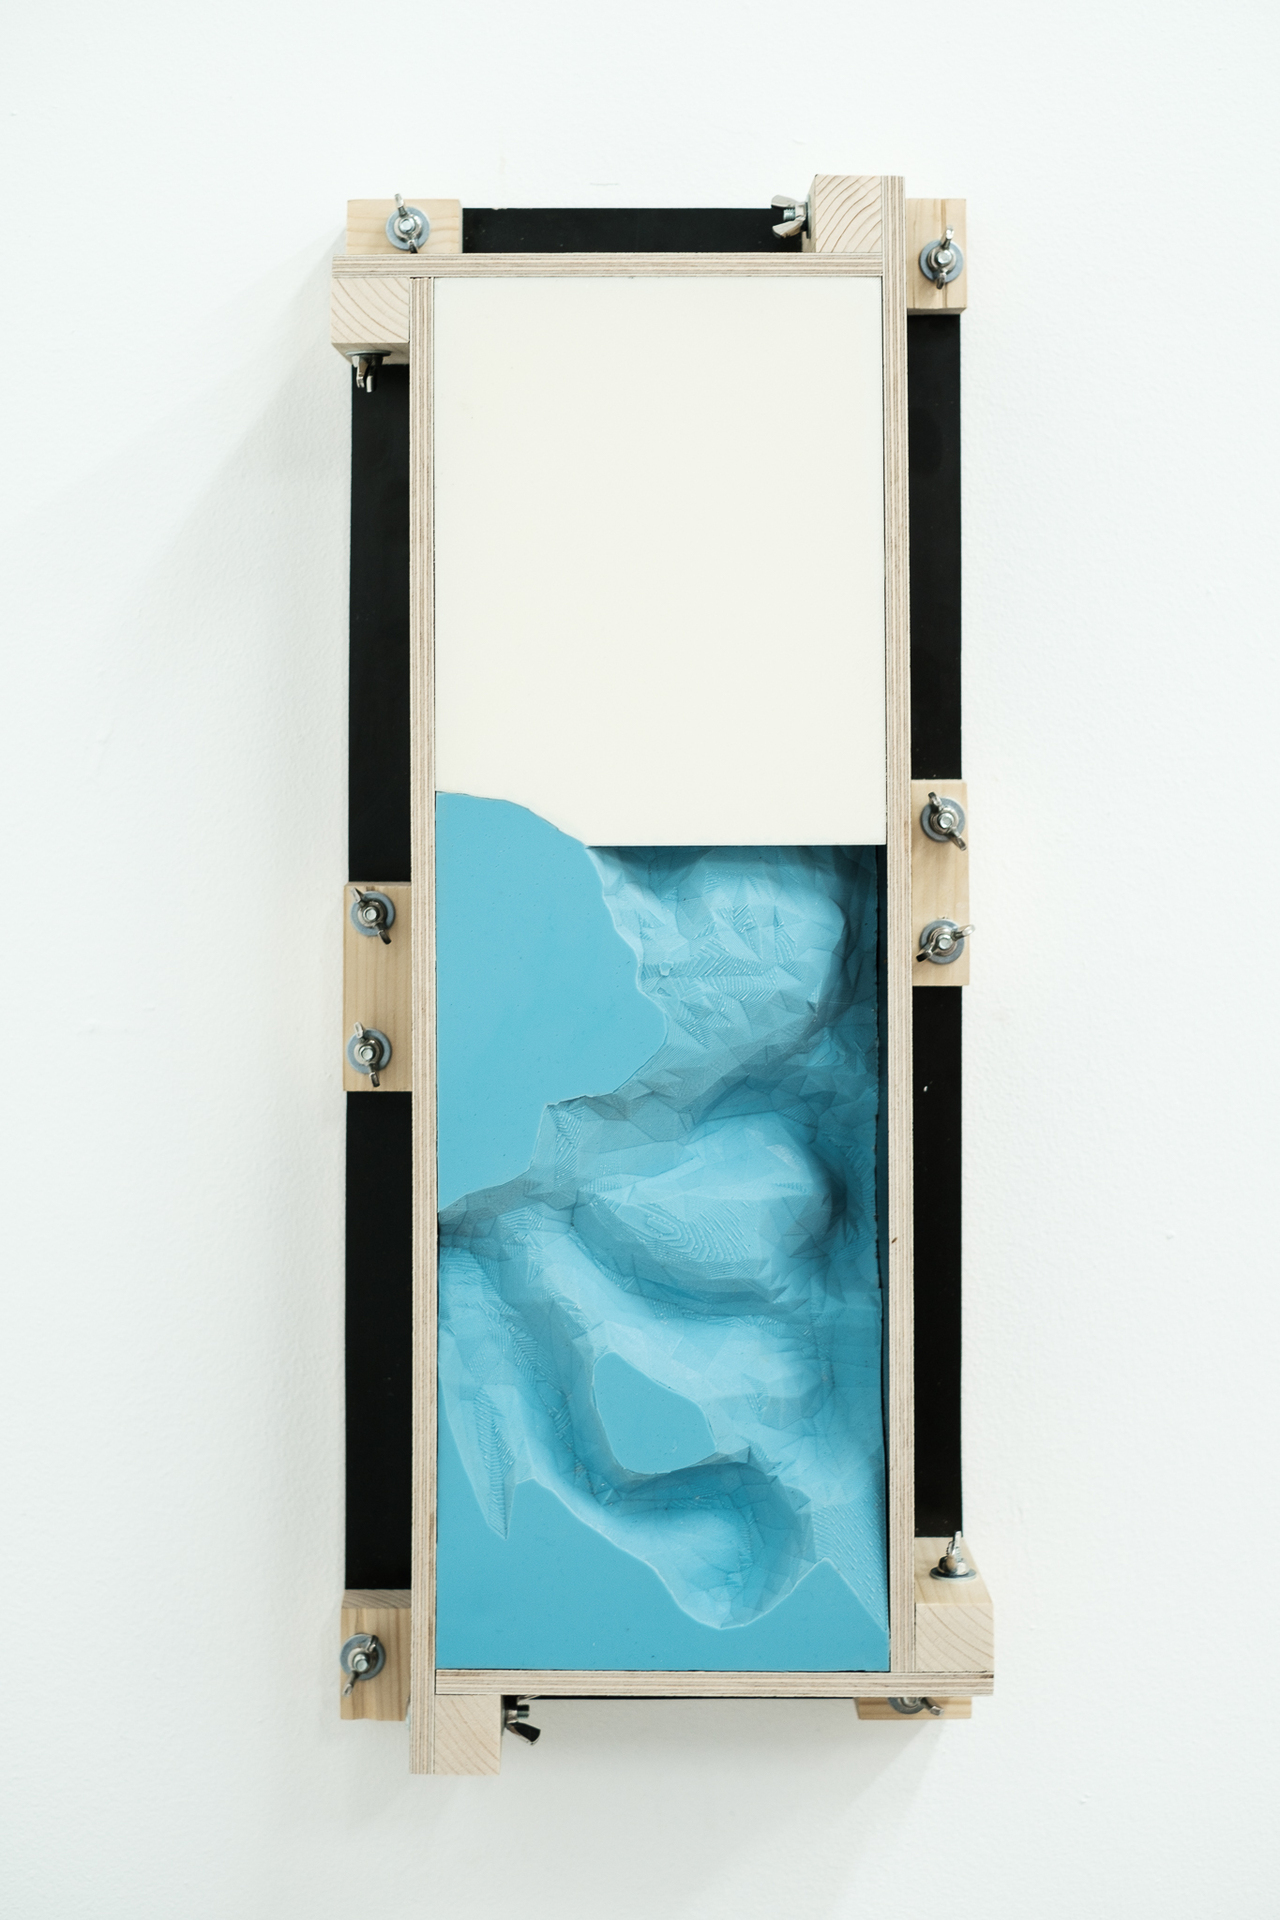 David Haack Monberg, Icons Made Without Hands [.GCODE .STL .RCP .ZIP .JPG .ETC], 2019, silicone, plywood, digital artefact reliefs, series of 6, 60 x 25 x 10 cm